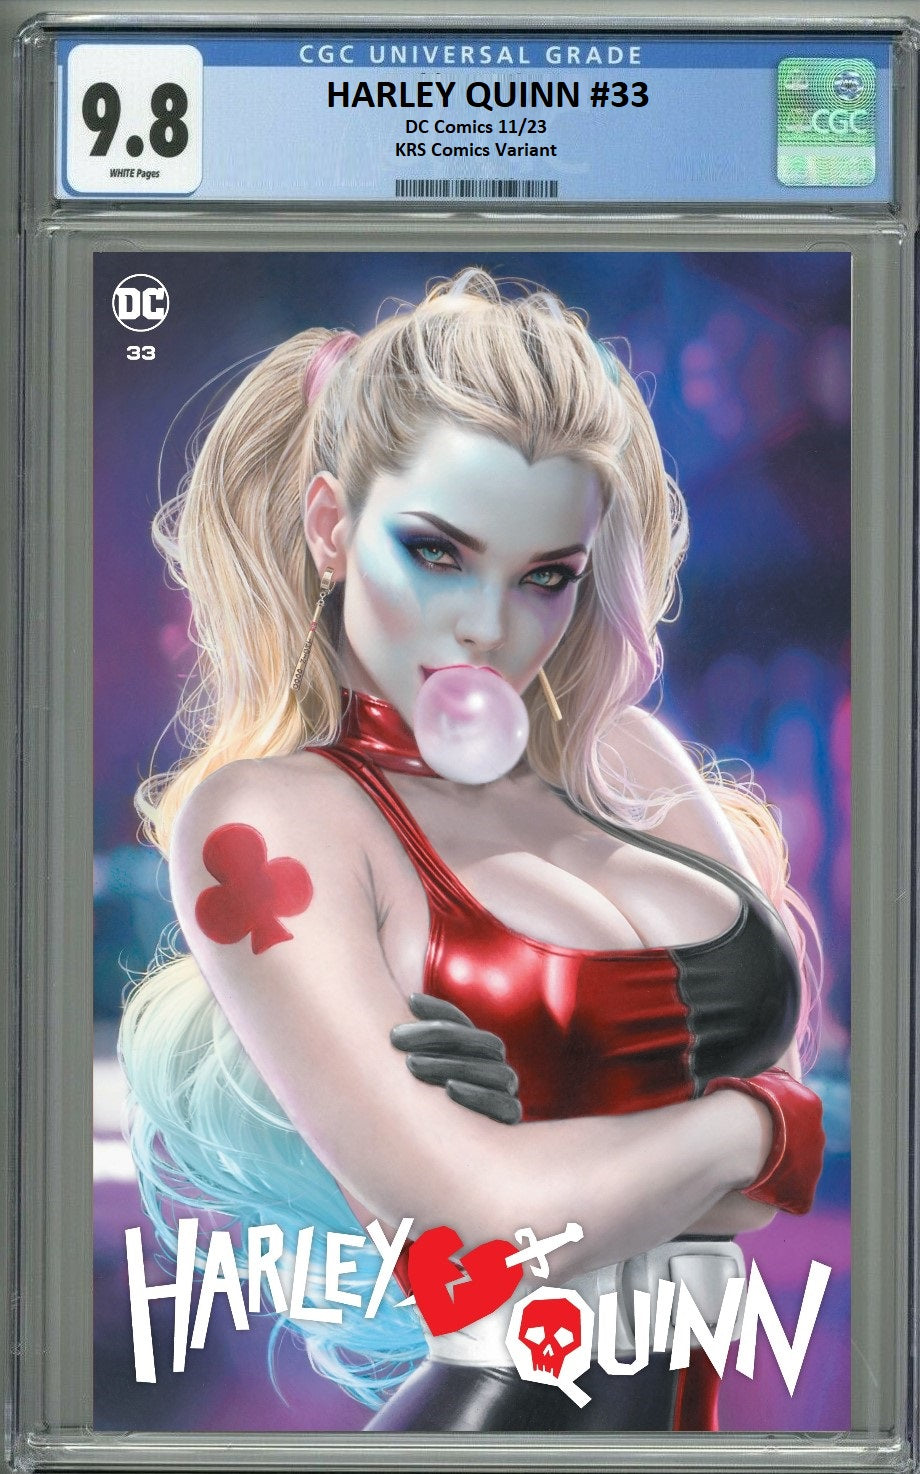 HARLEY QUINN #33 NATALI SANDERS TRADE DRESS VARIANT LIMITED TO 3000 COPIES CGC 9.8 PREORDER